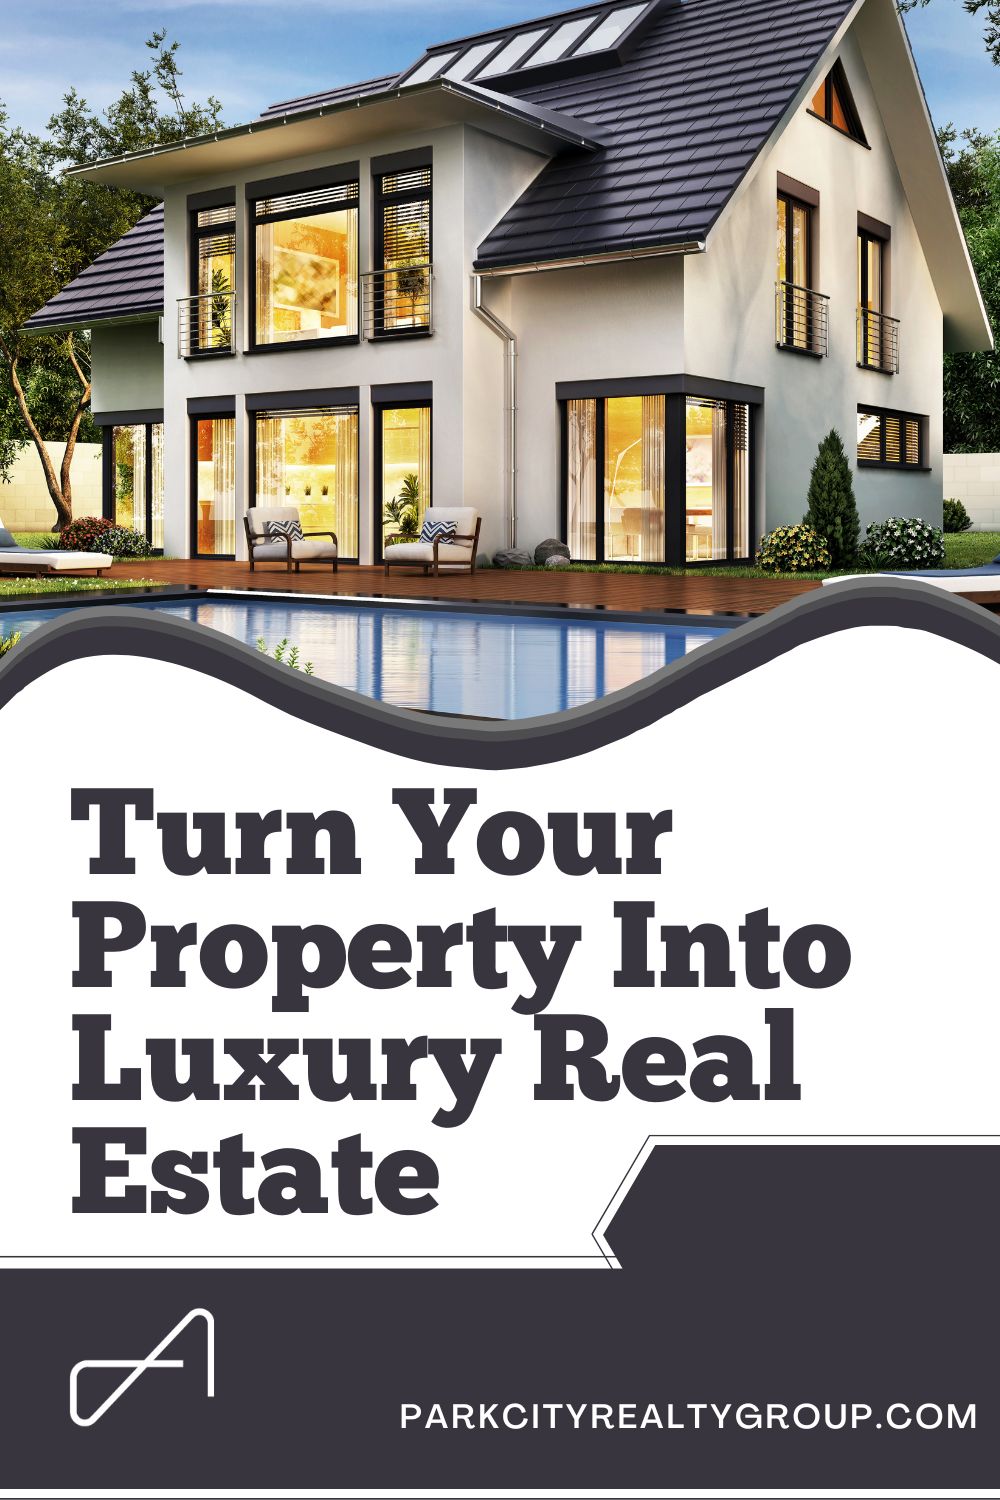 Turn Your Property Into Luxury Real Estate